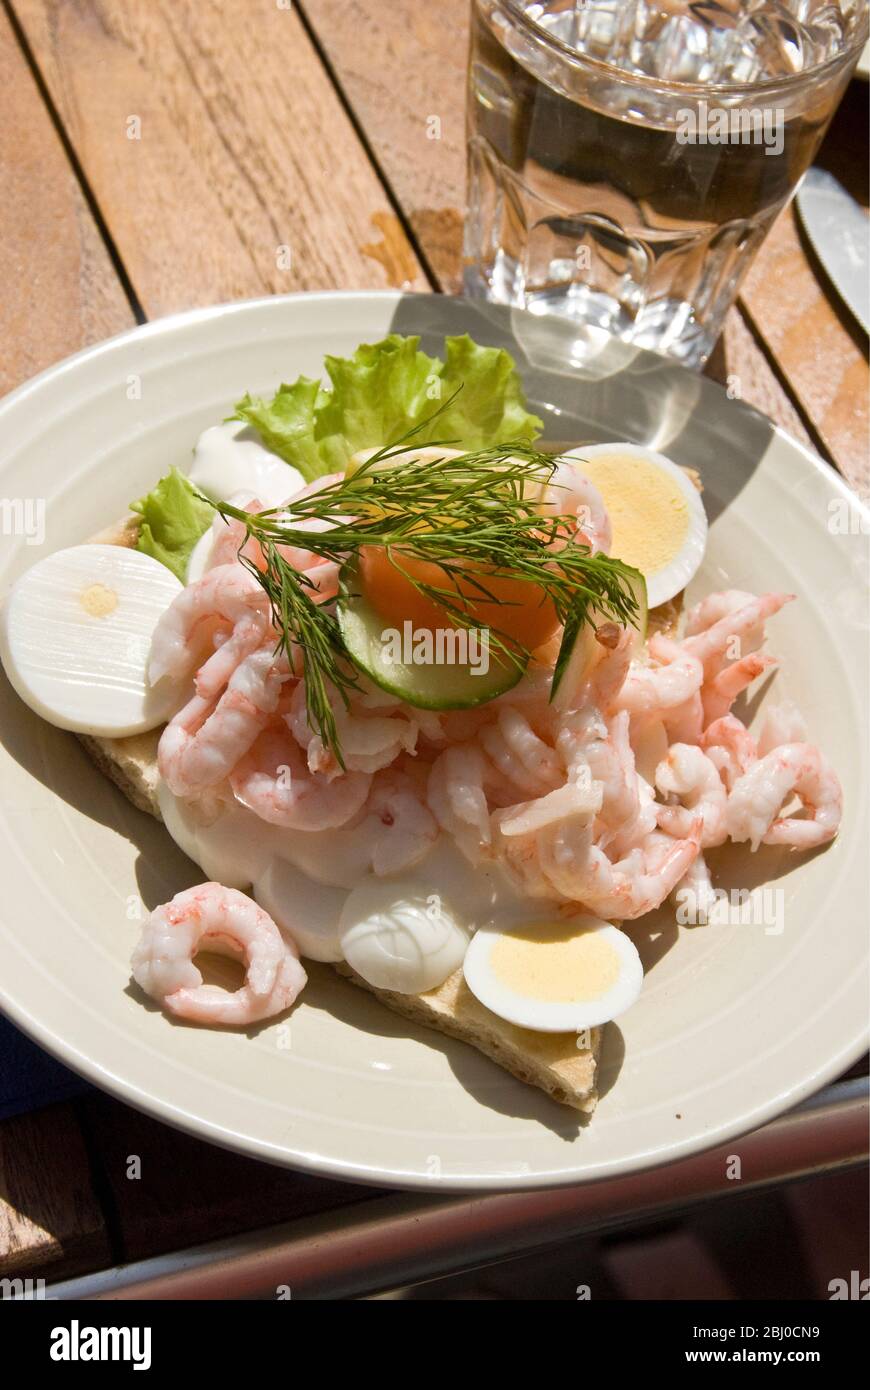 Swedish open sandwich of fresh prawns piled high on homemde flat bread with salad and mayonnaise, served on cafe table outdoors - Stock Photo